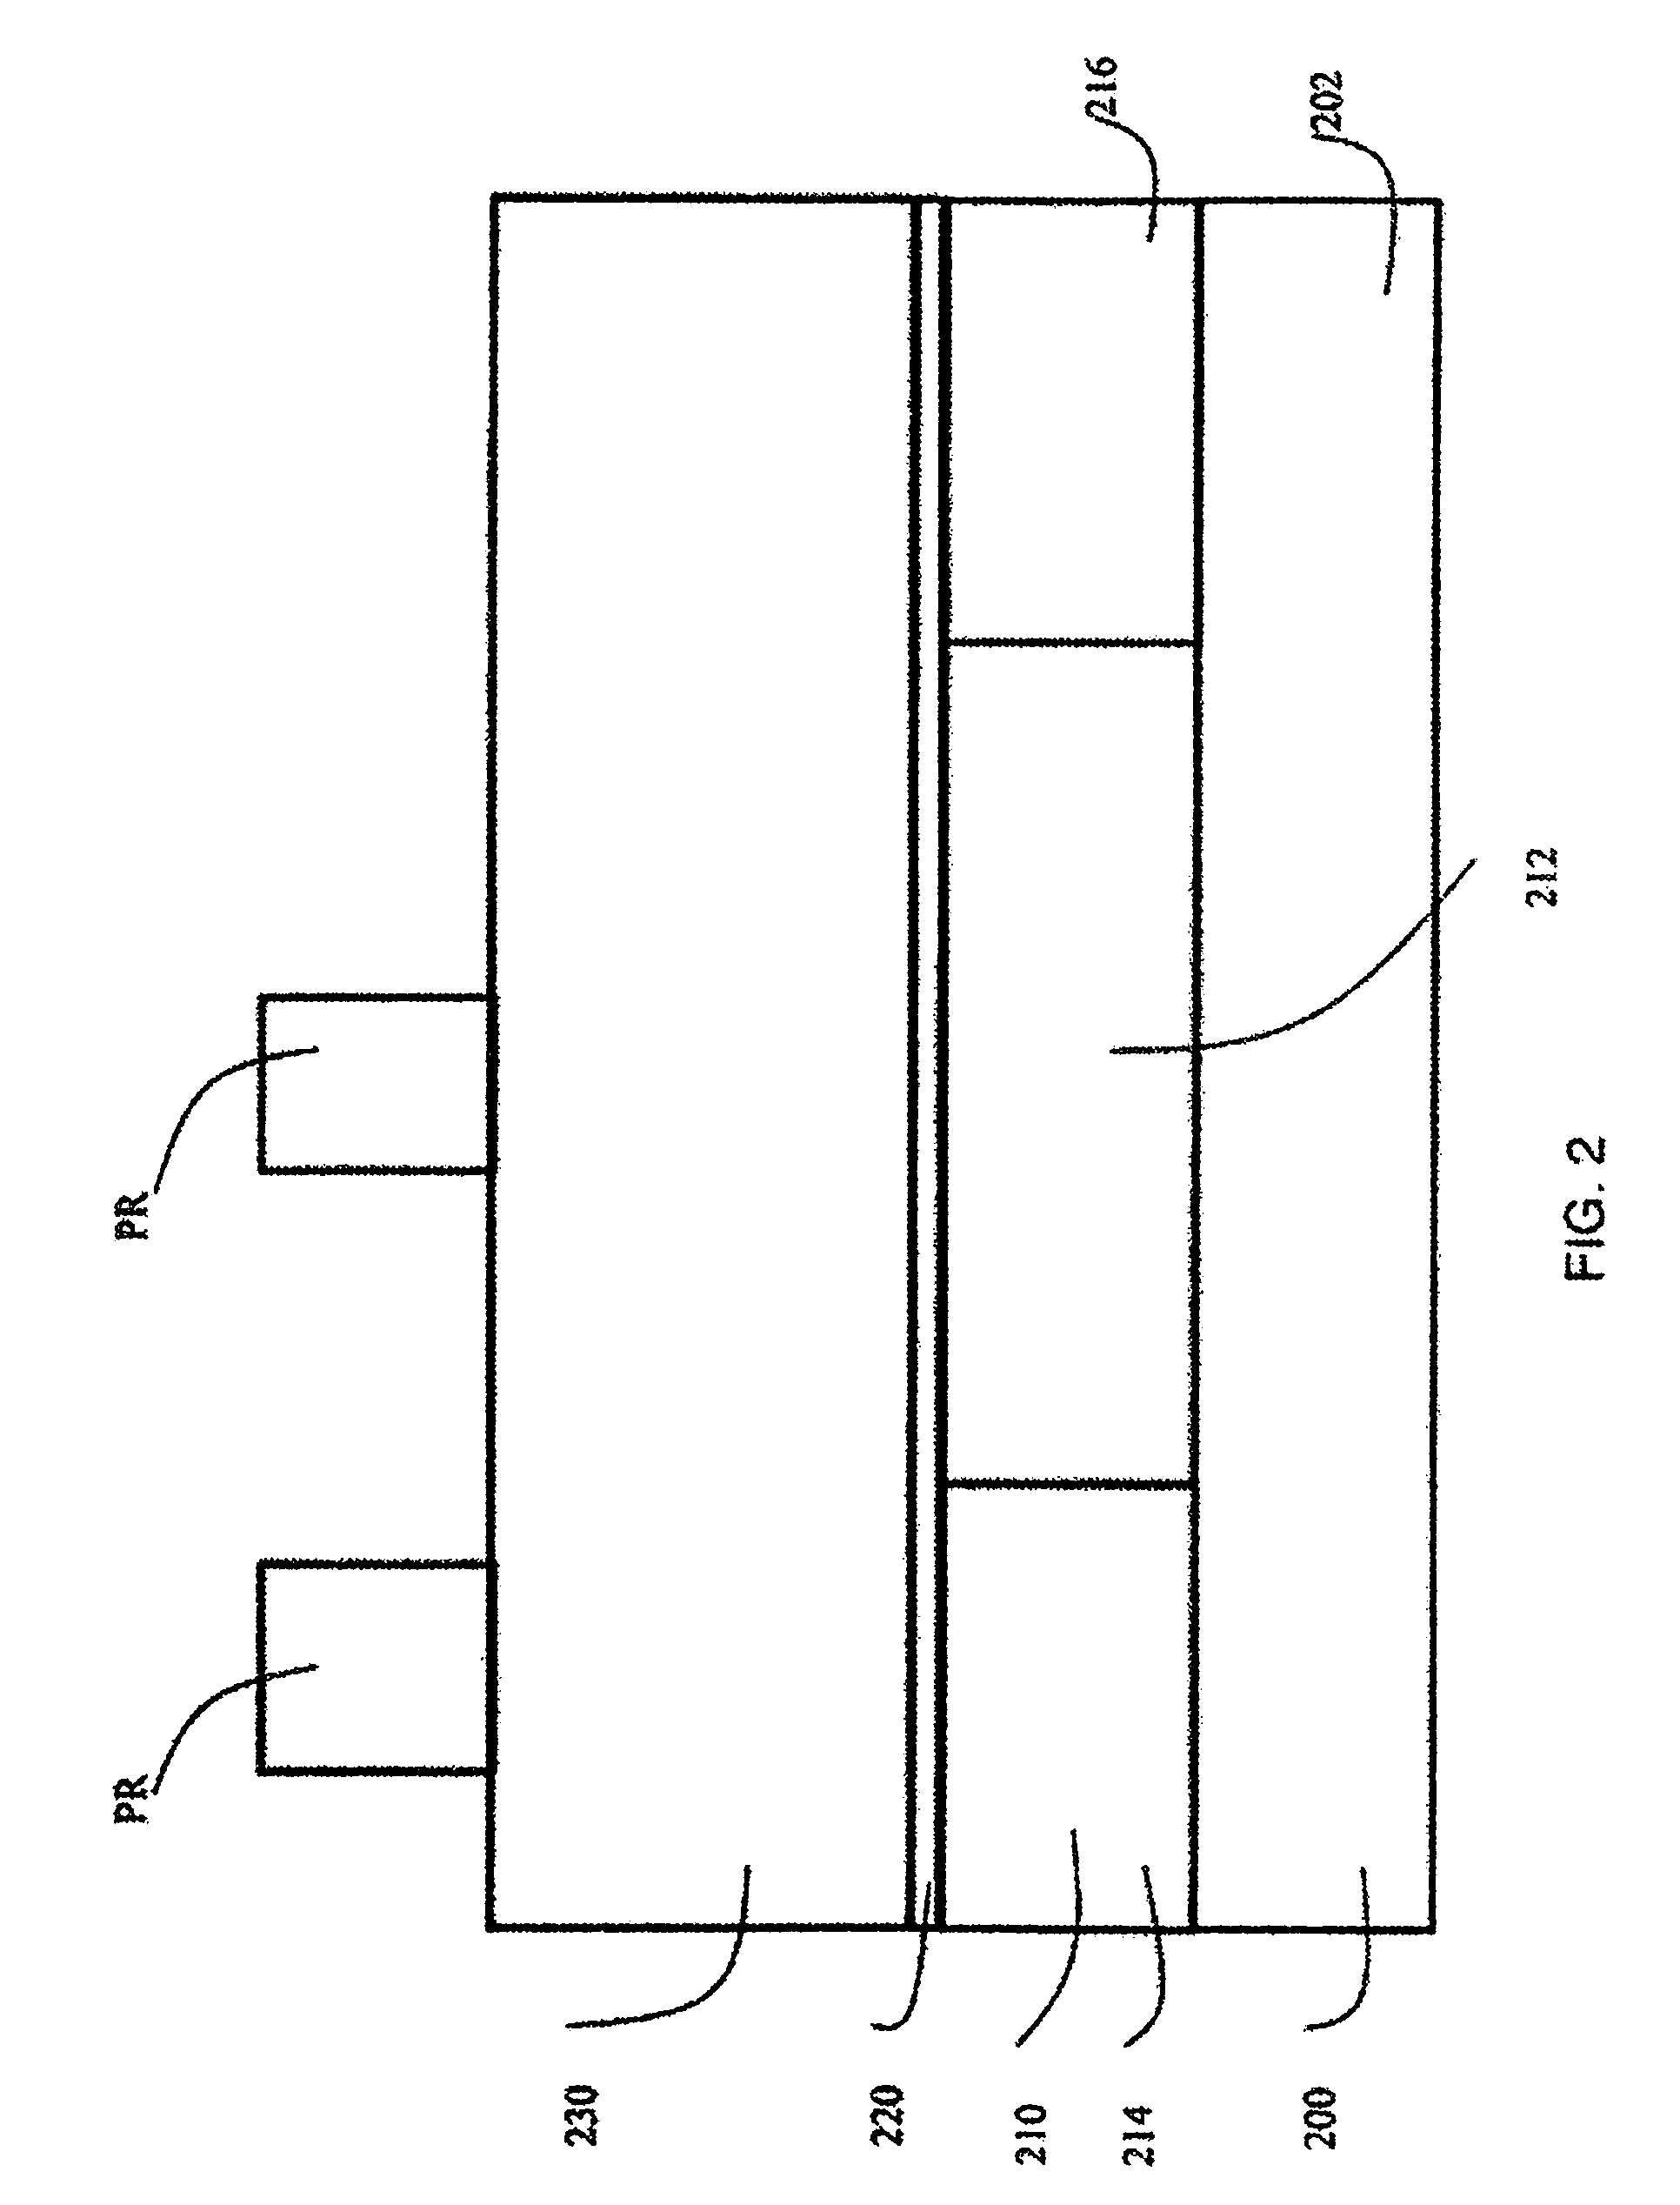 Structure and method for making high density mosfet circuits with different height contact lines